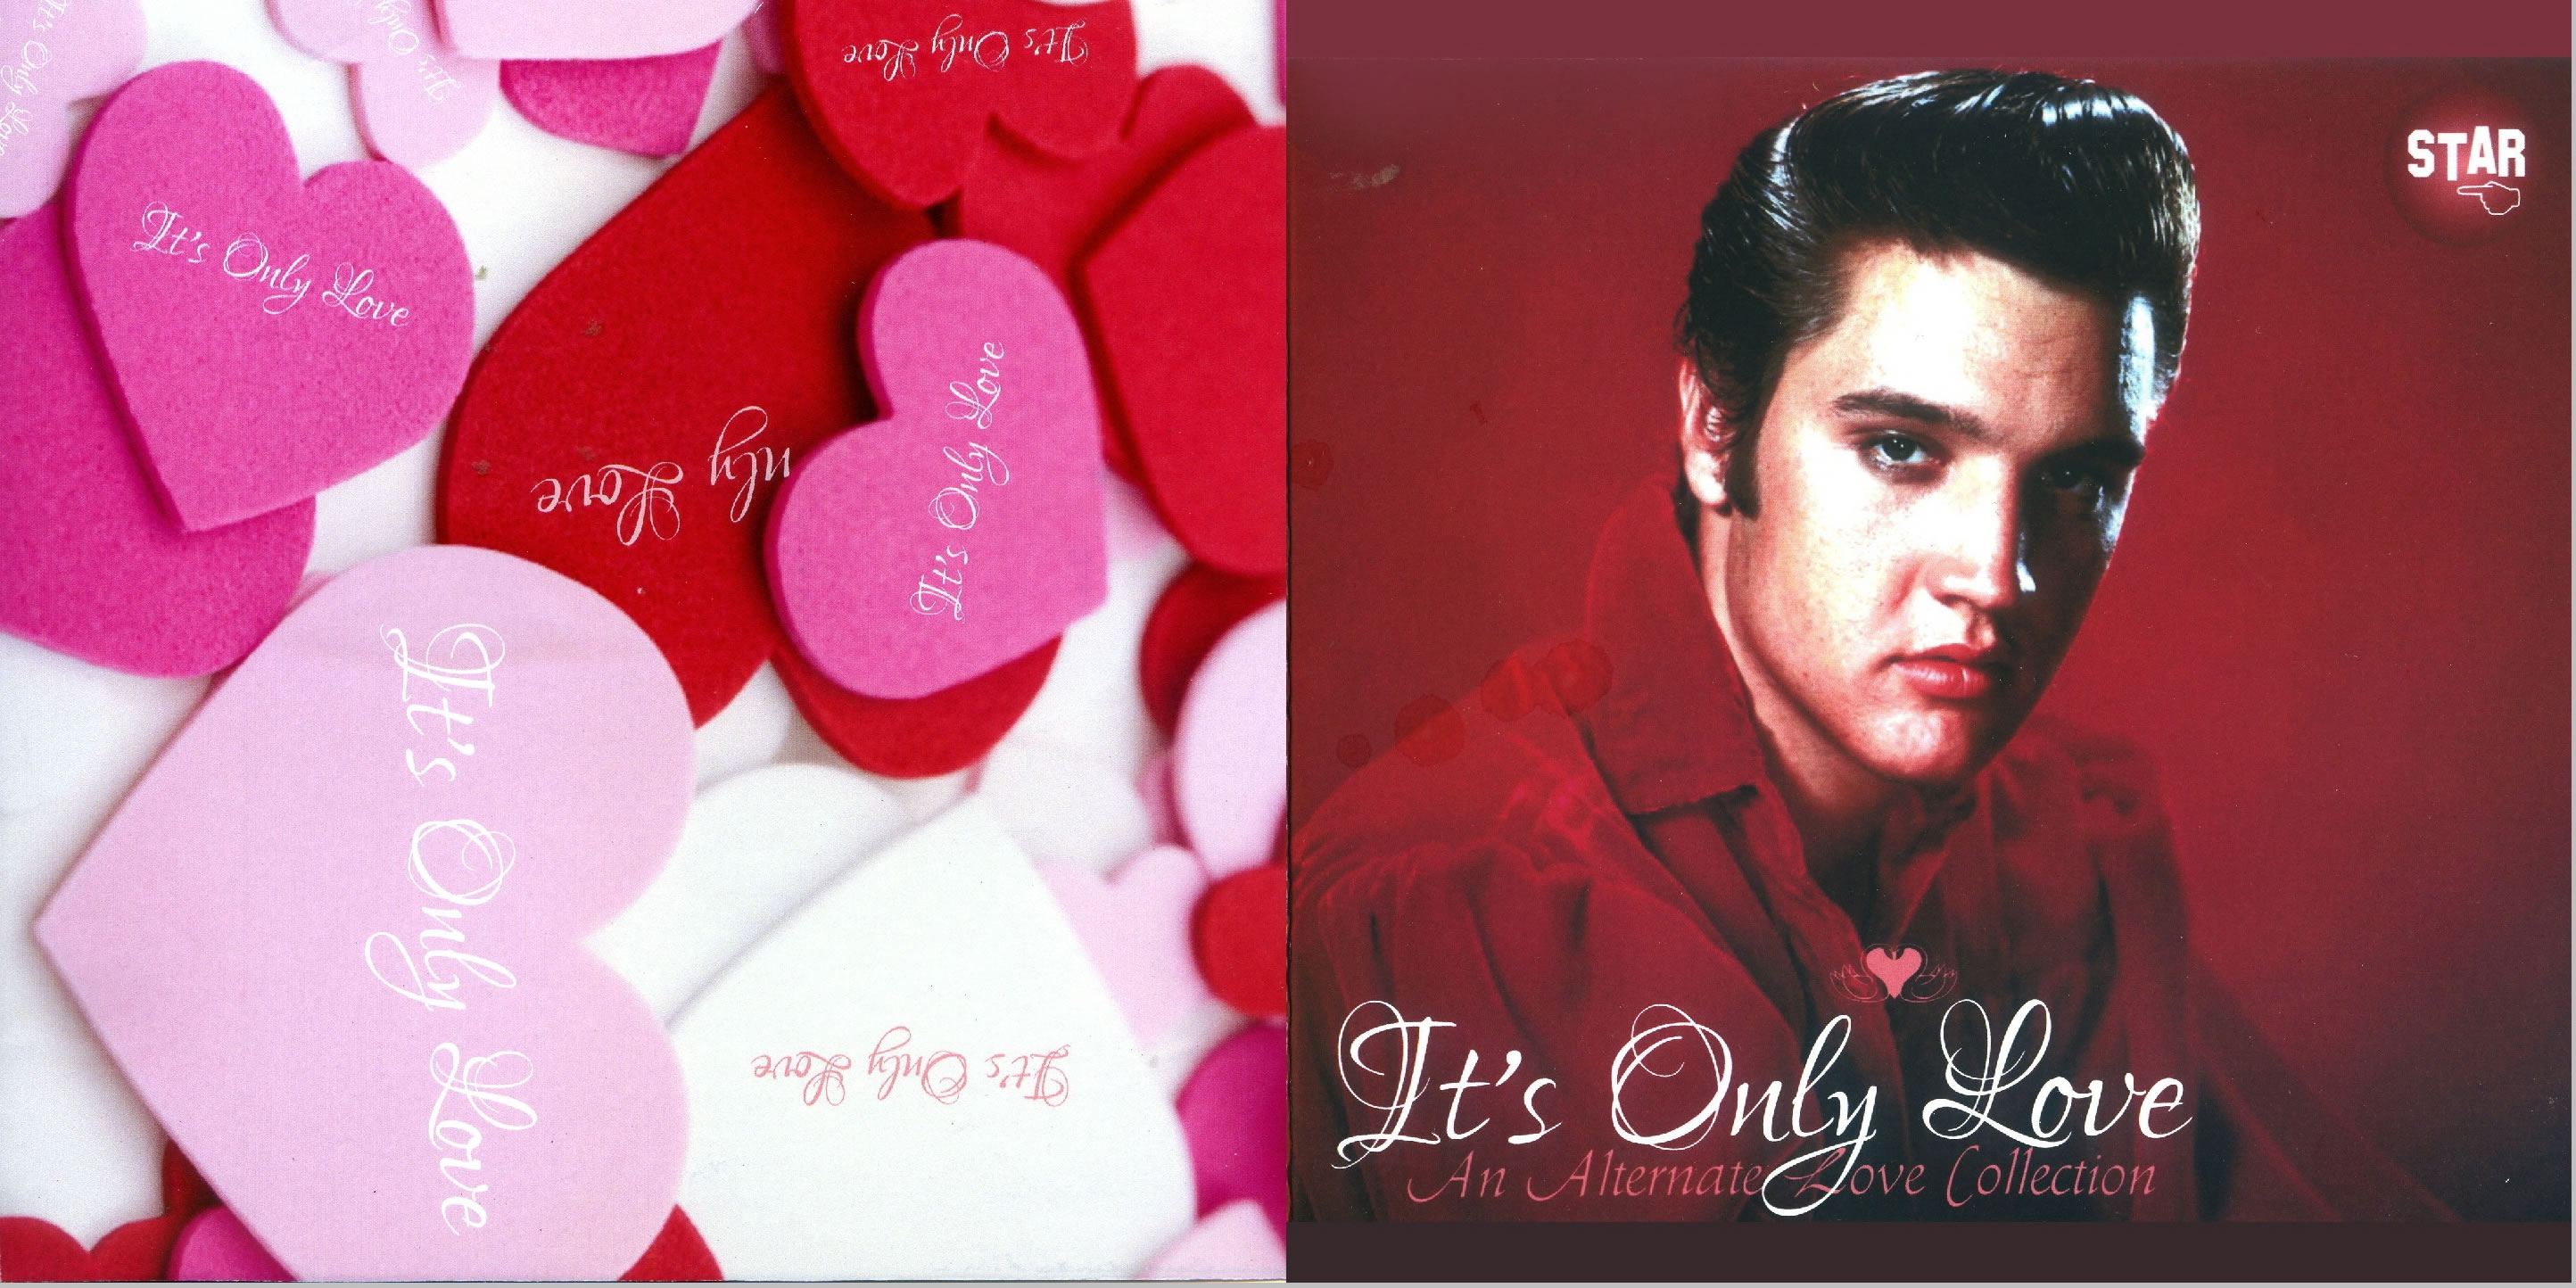 Elvis Presley - It's Only Love-An Alternate Love Collection [Star]